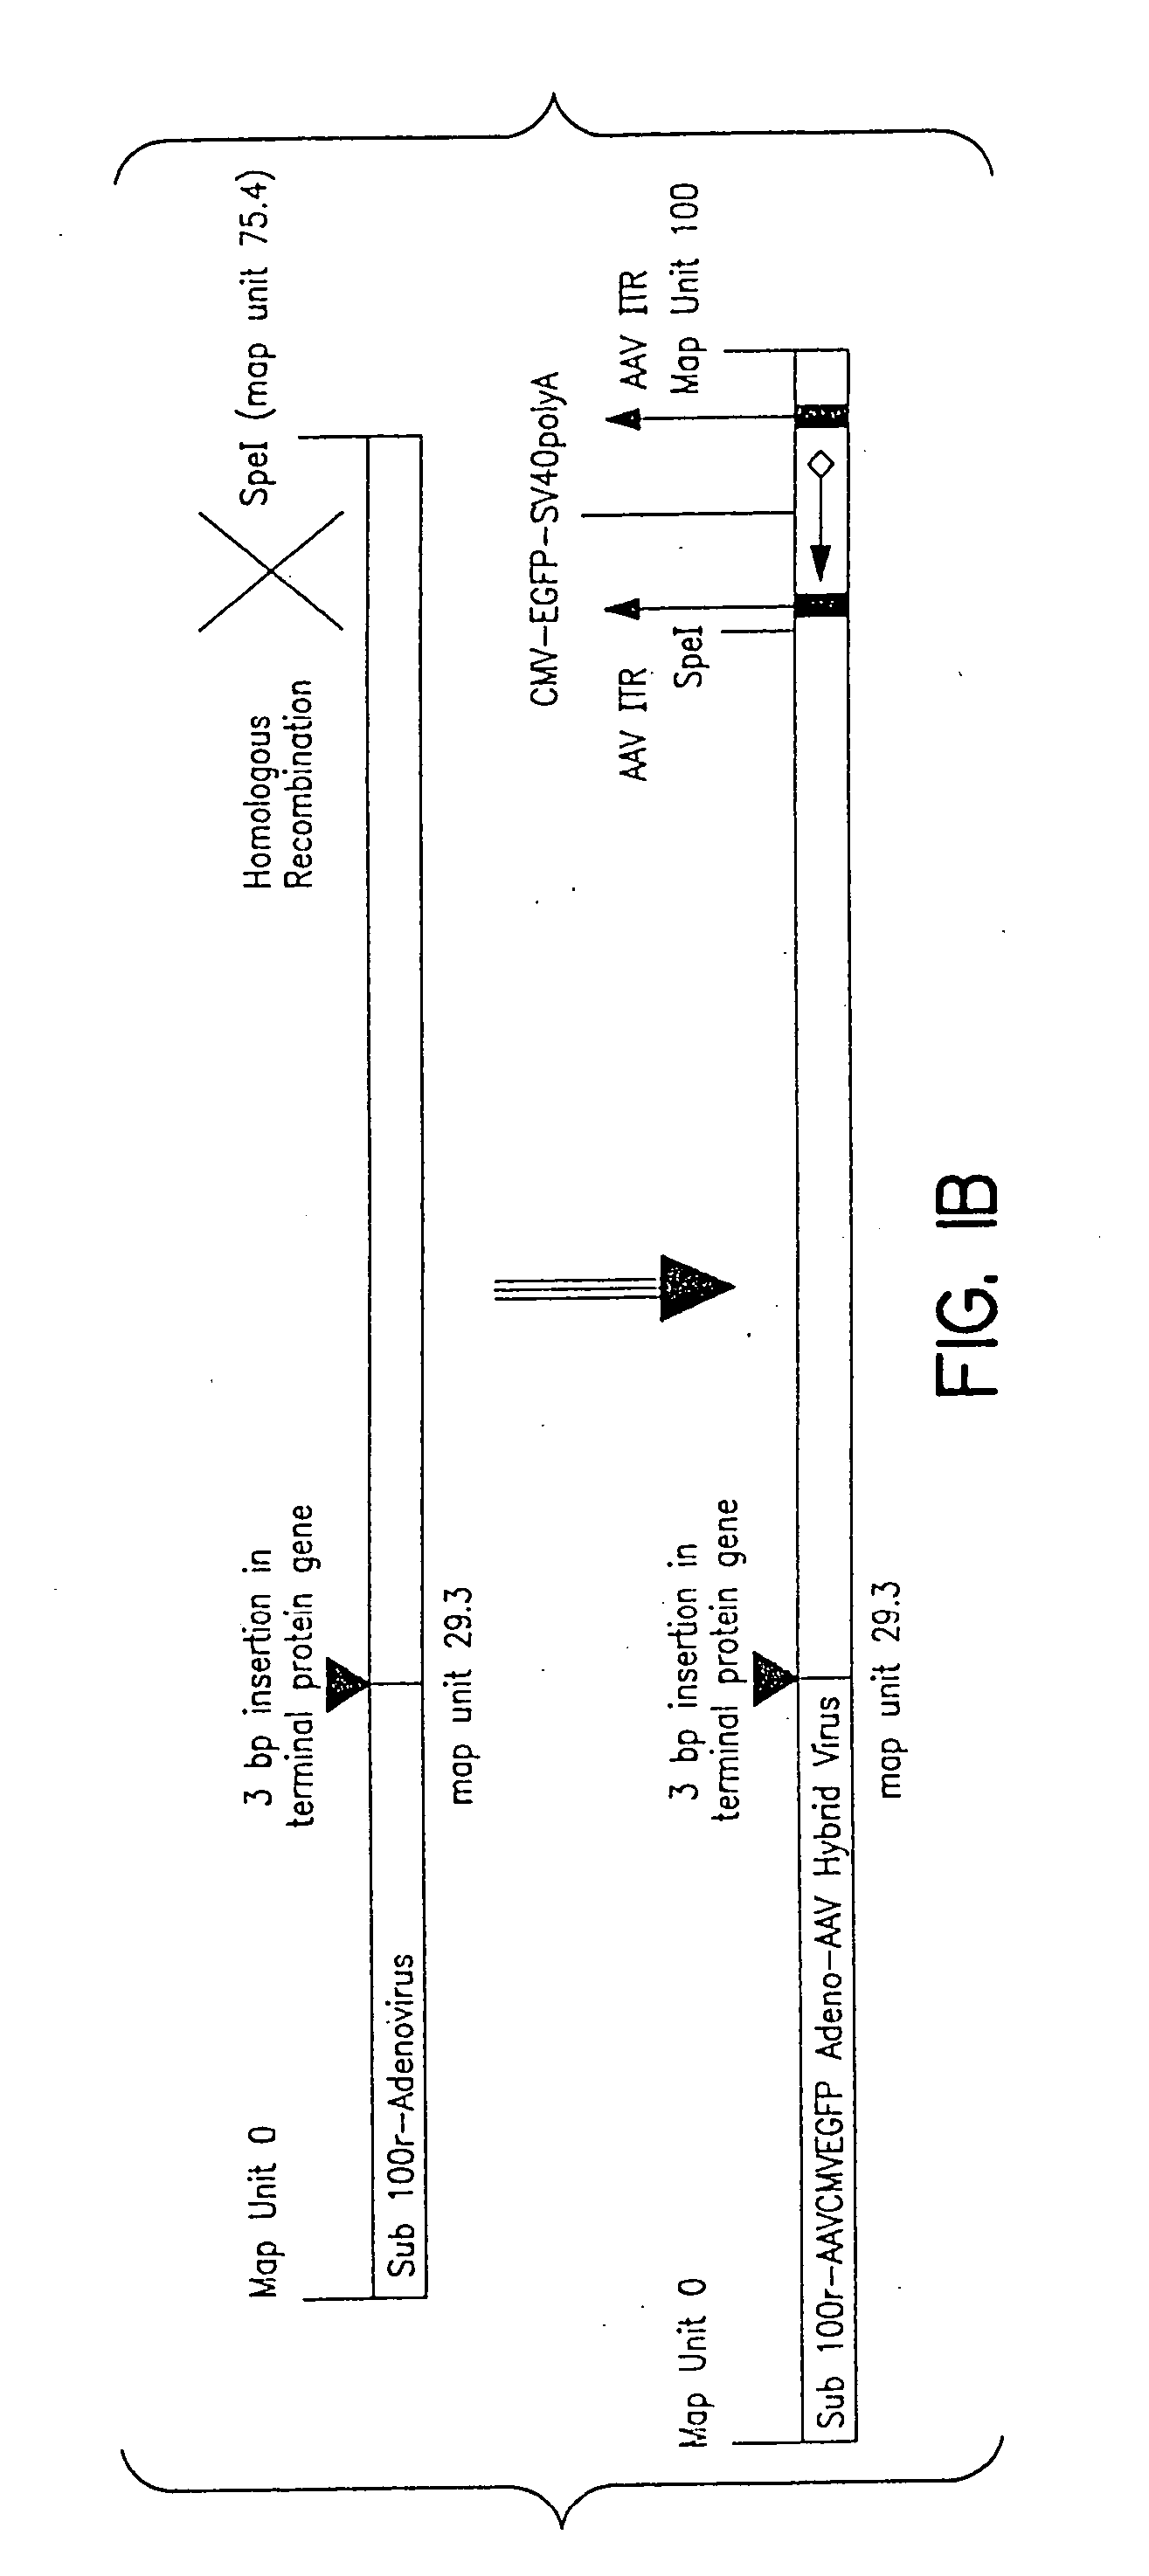 Compositions and methods for helper-free production of recombinant adeno-associated viruses